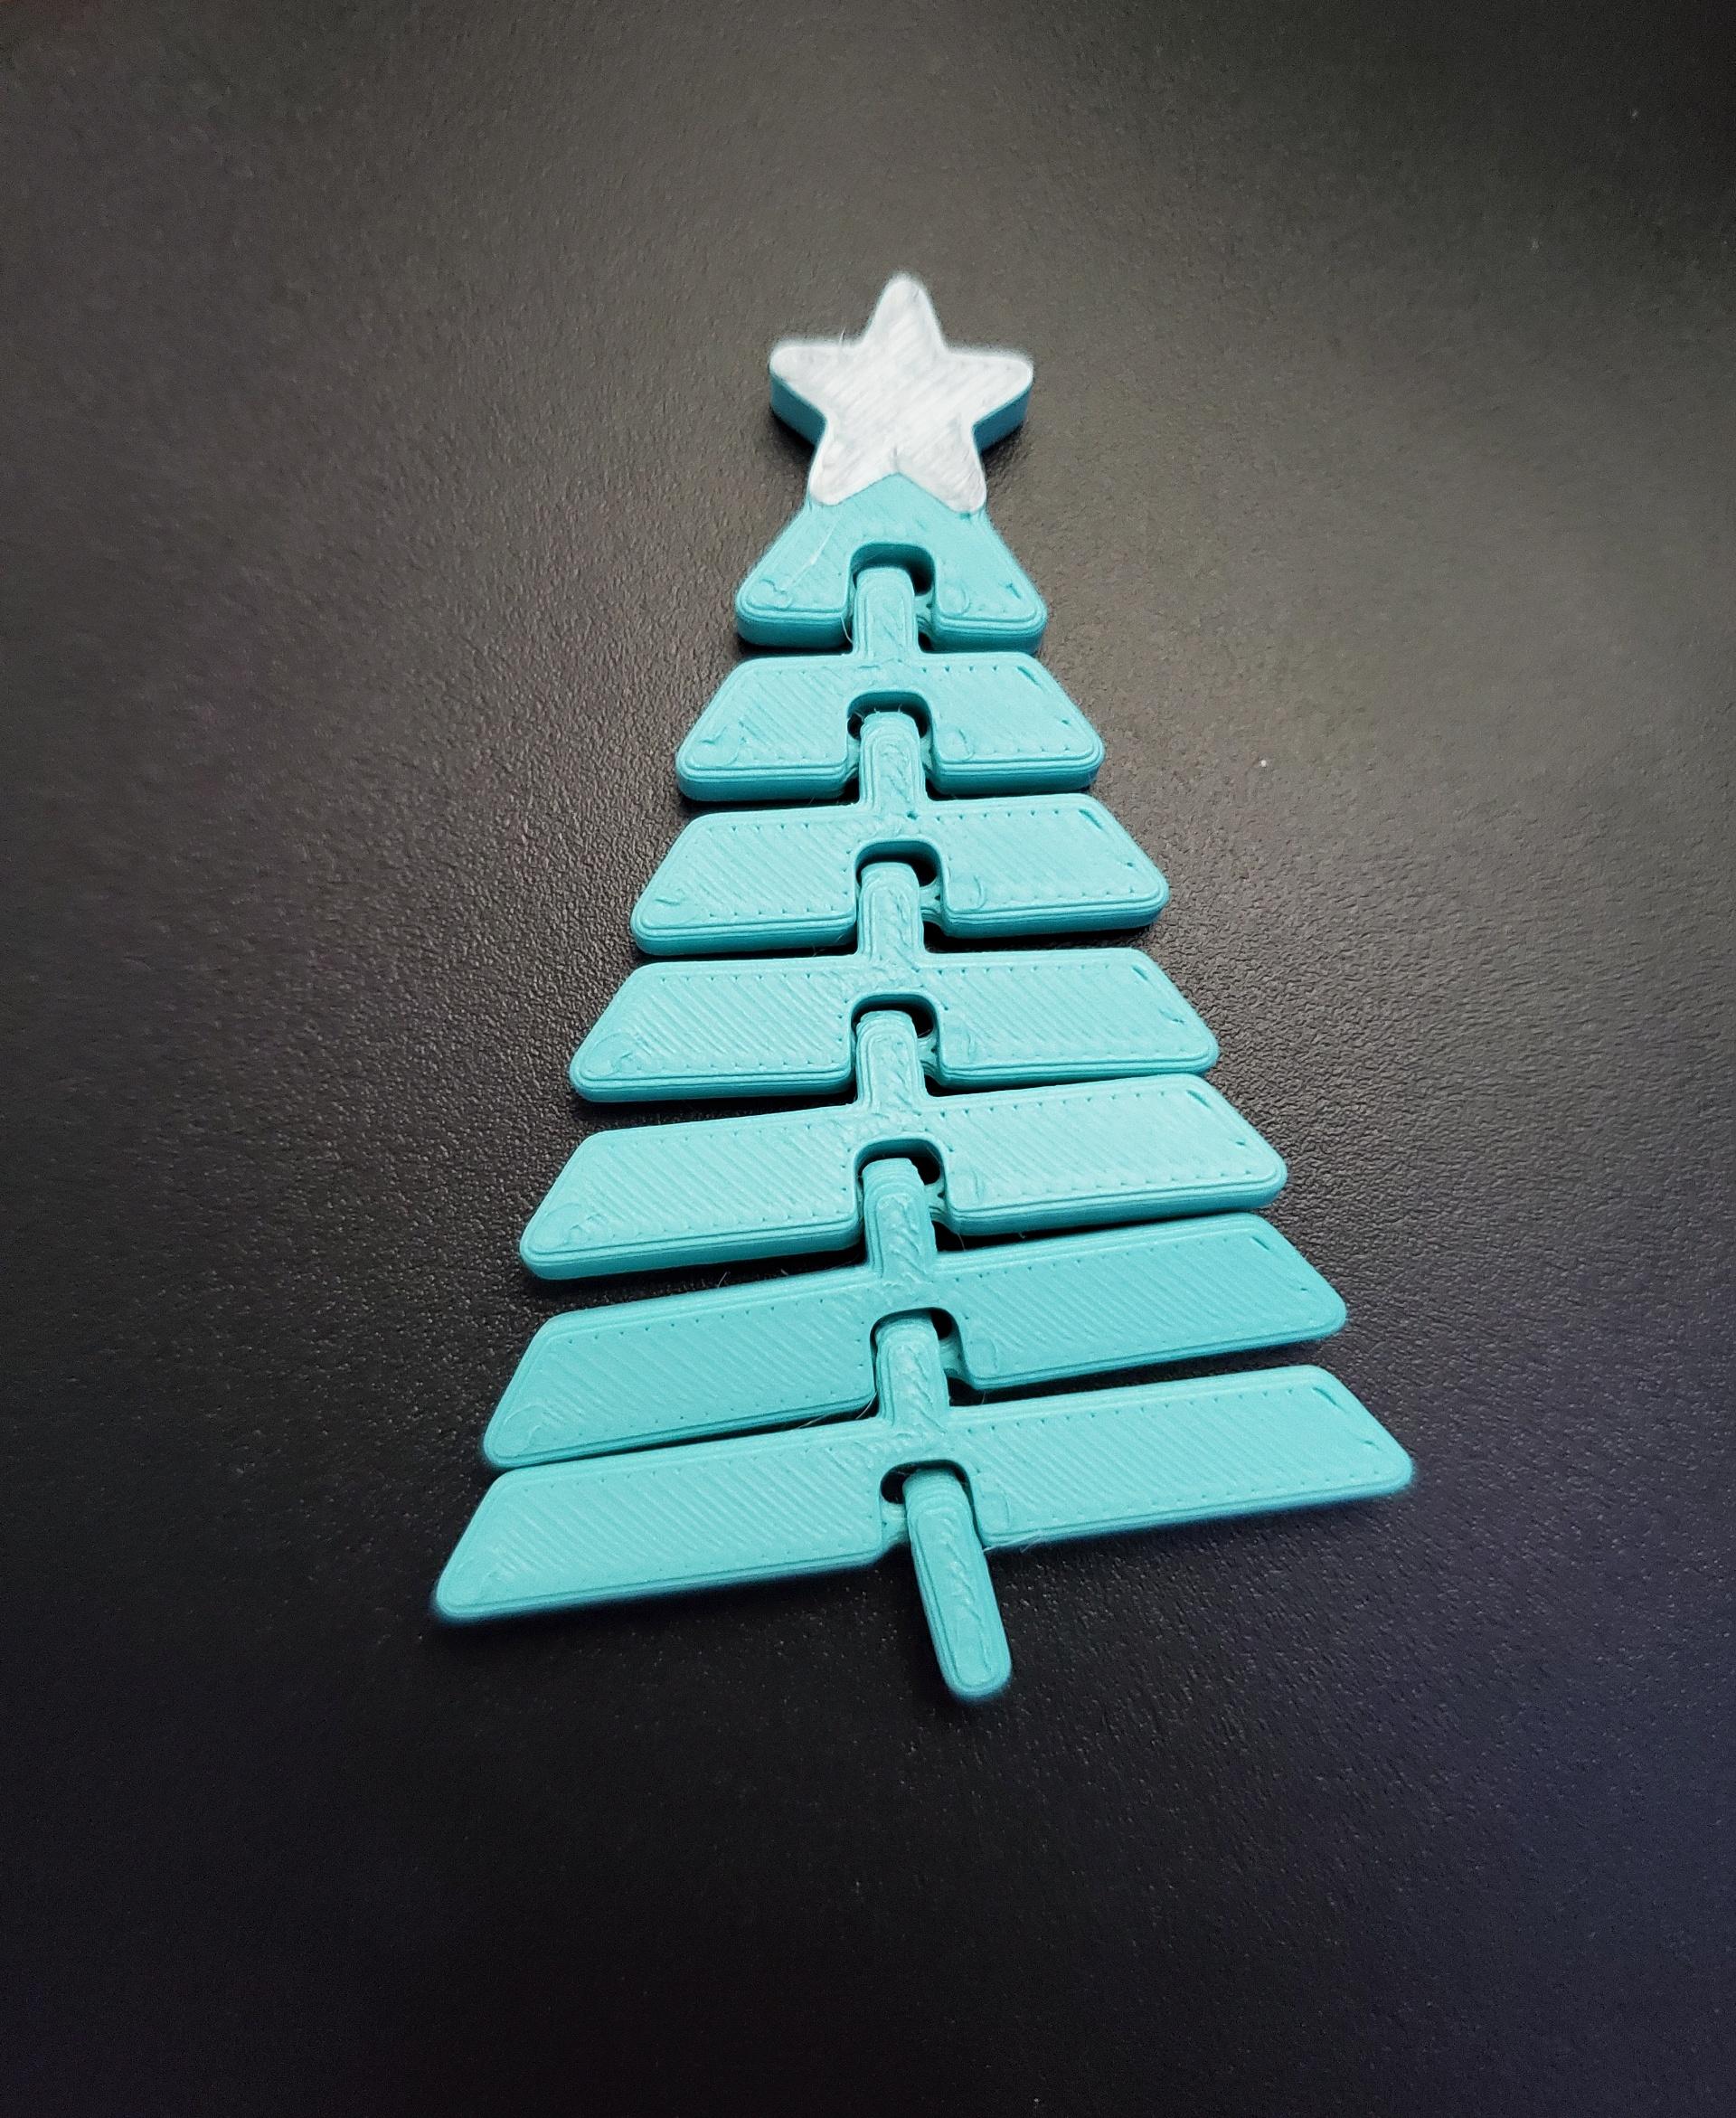 Articulated Christmas Tree with Star - Print in place fidget toy - 3mf - polyterra arctic teal - 3d model